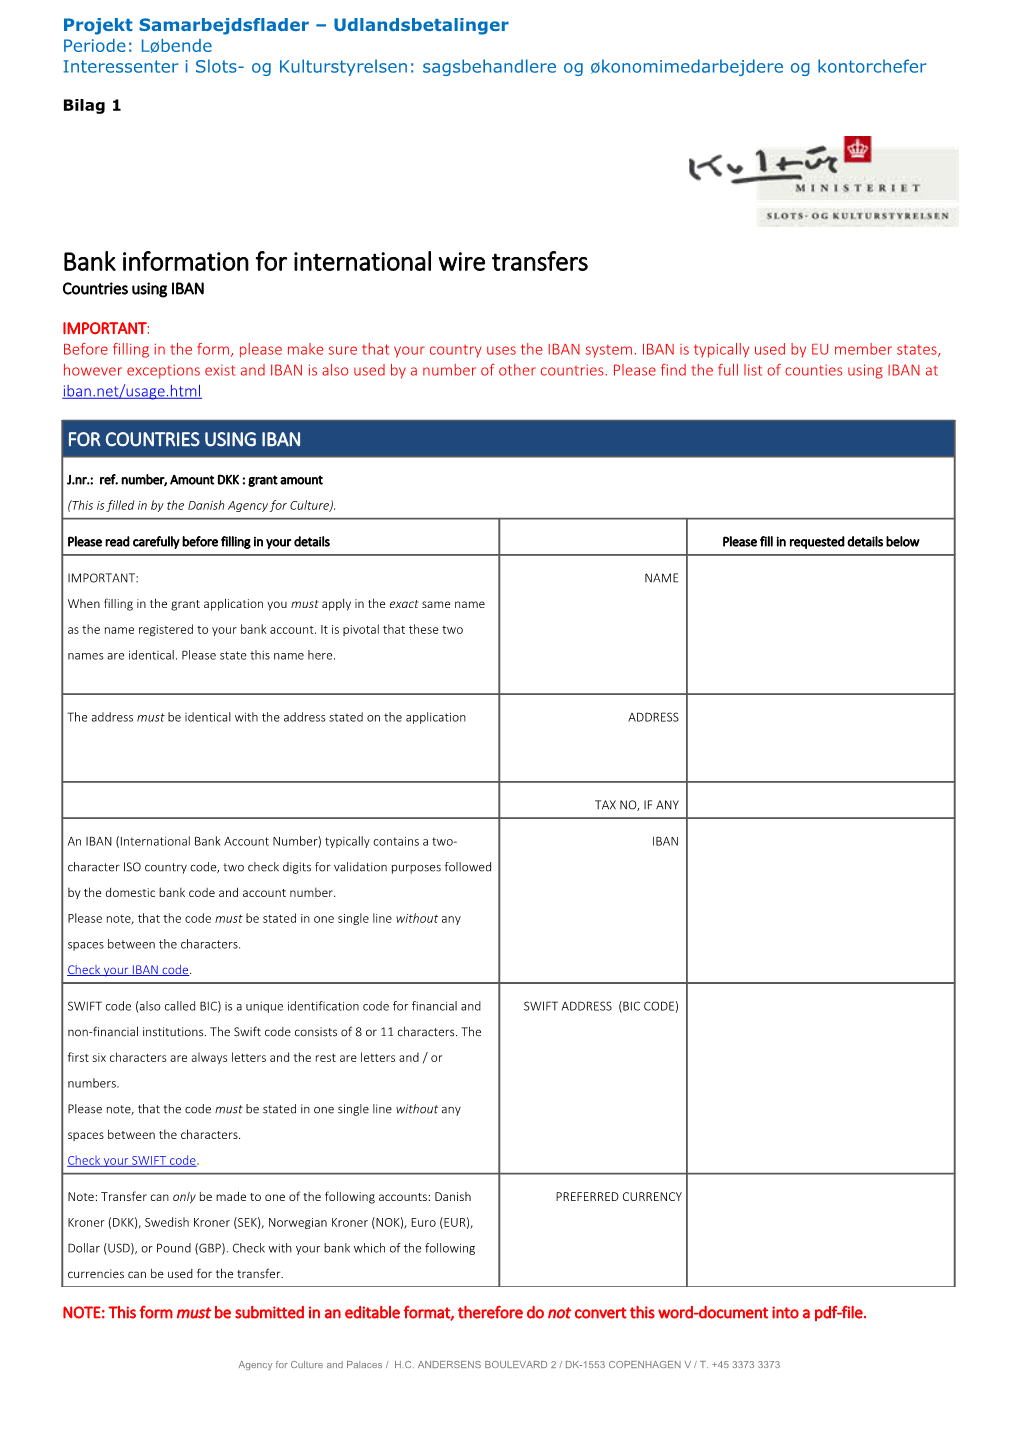 Bank Information for International Wire Transfers